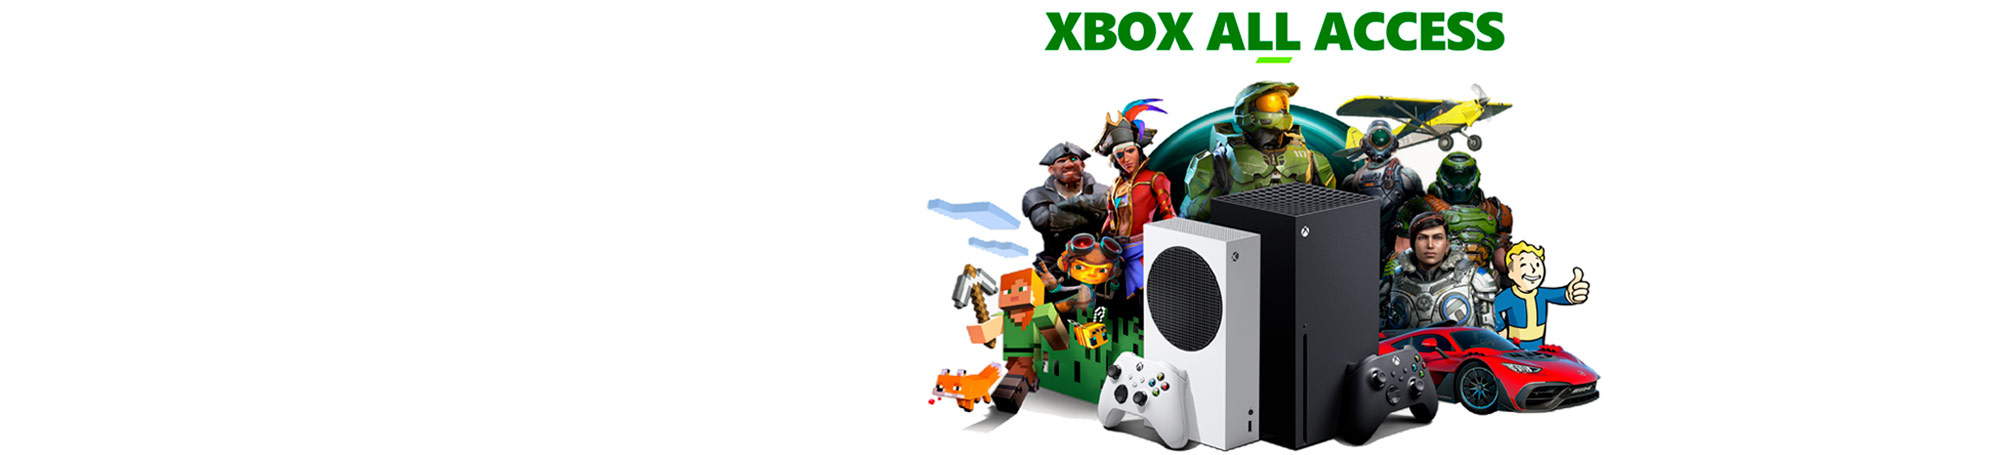 Xbox All Access, video game consoles and controllers.